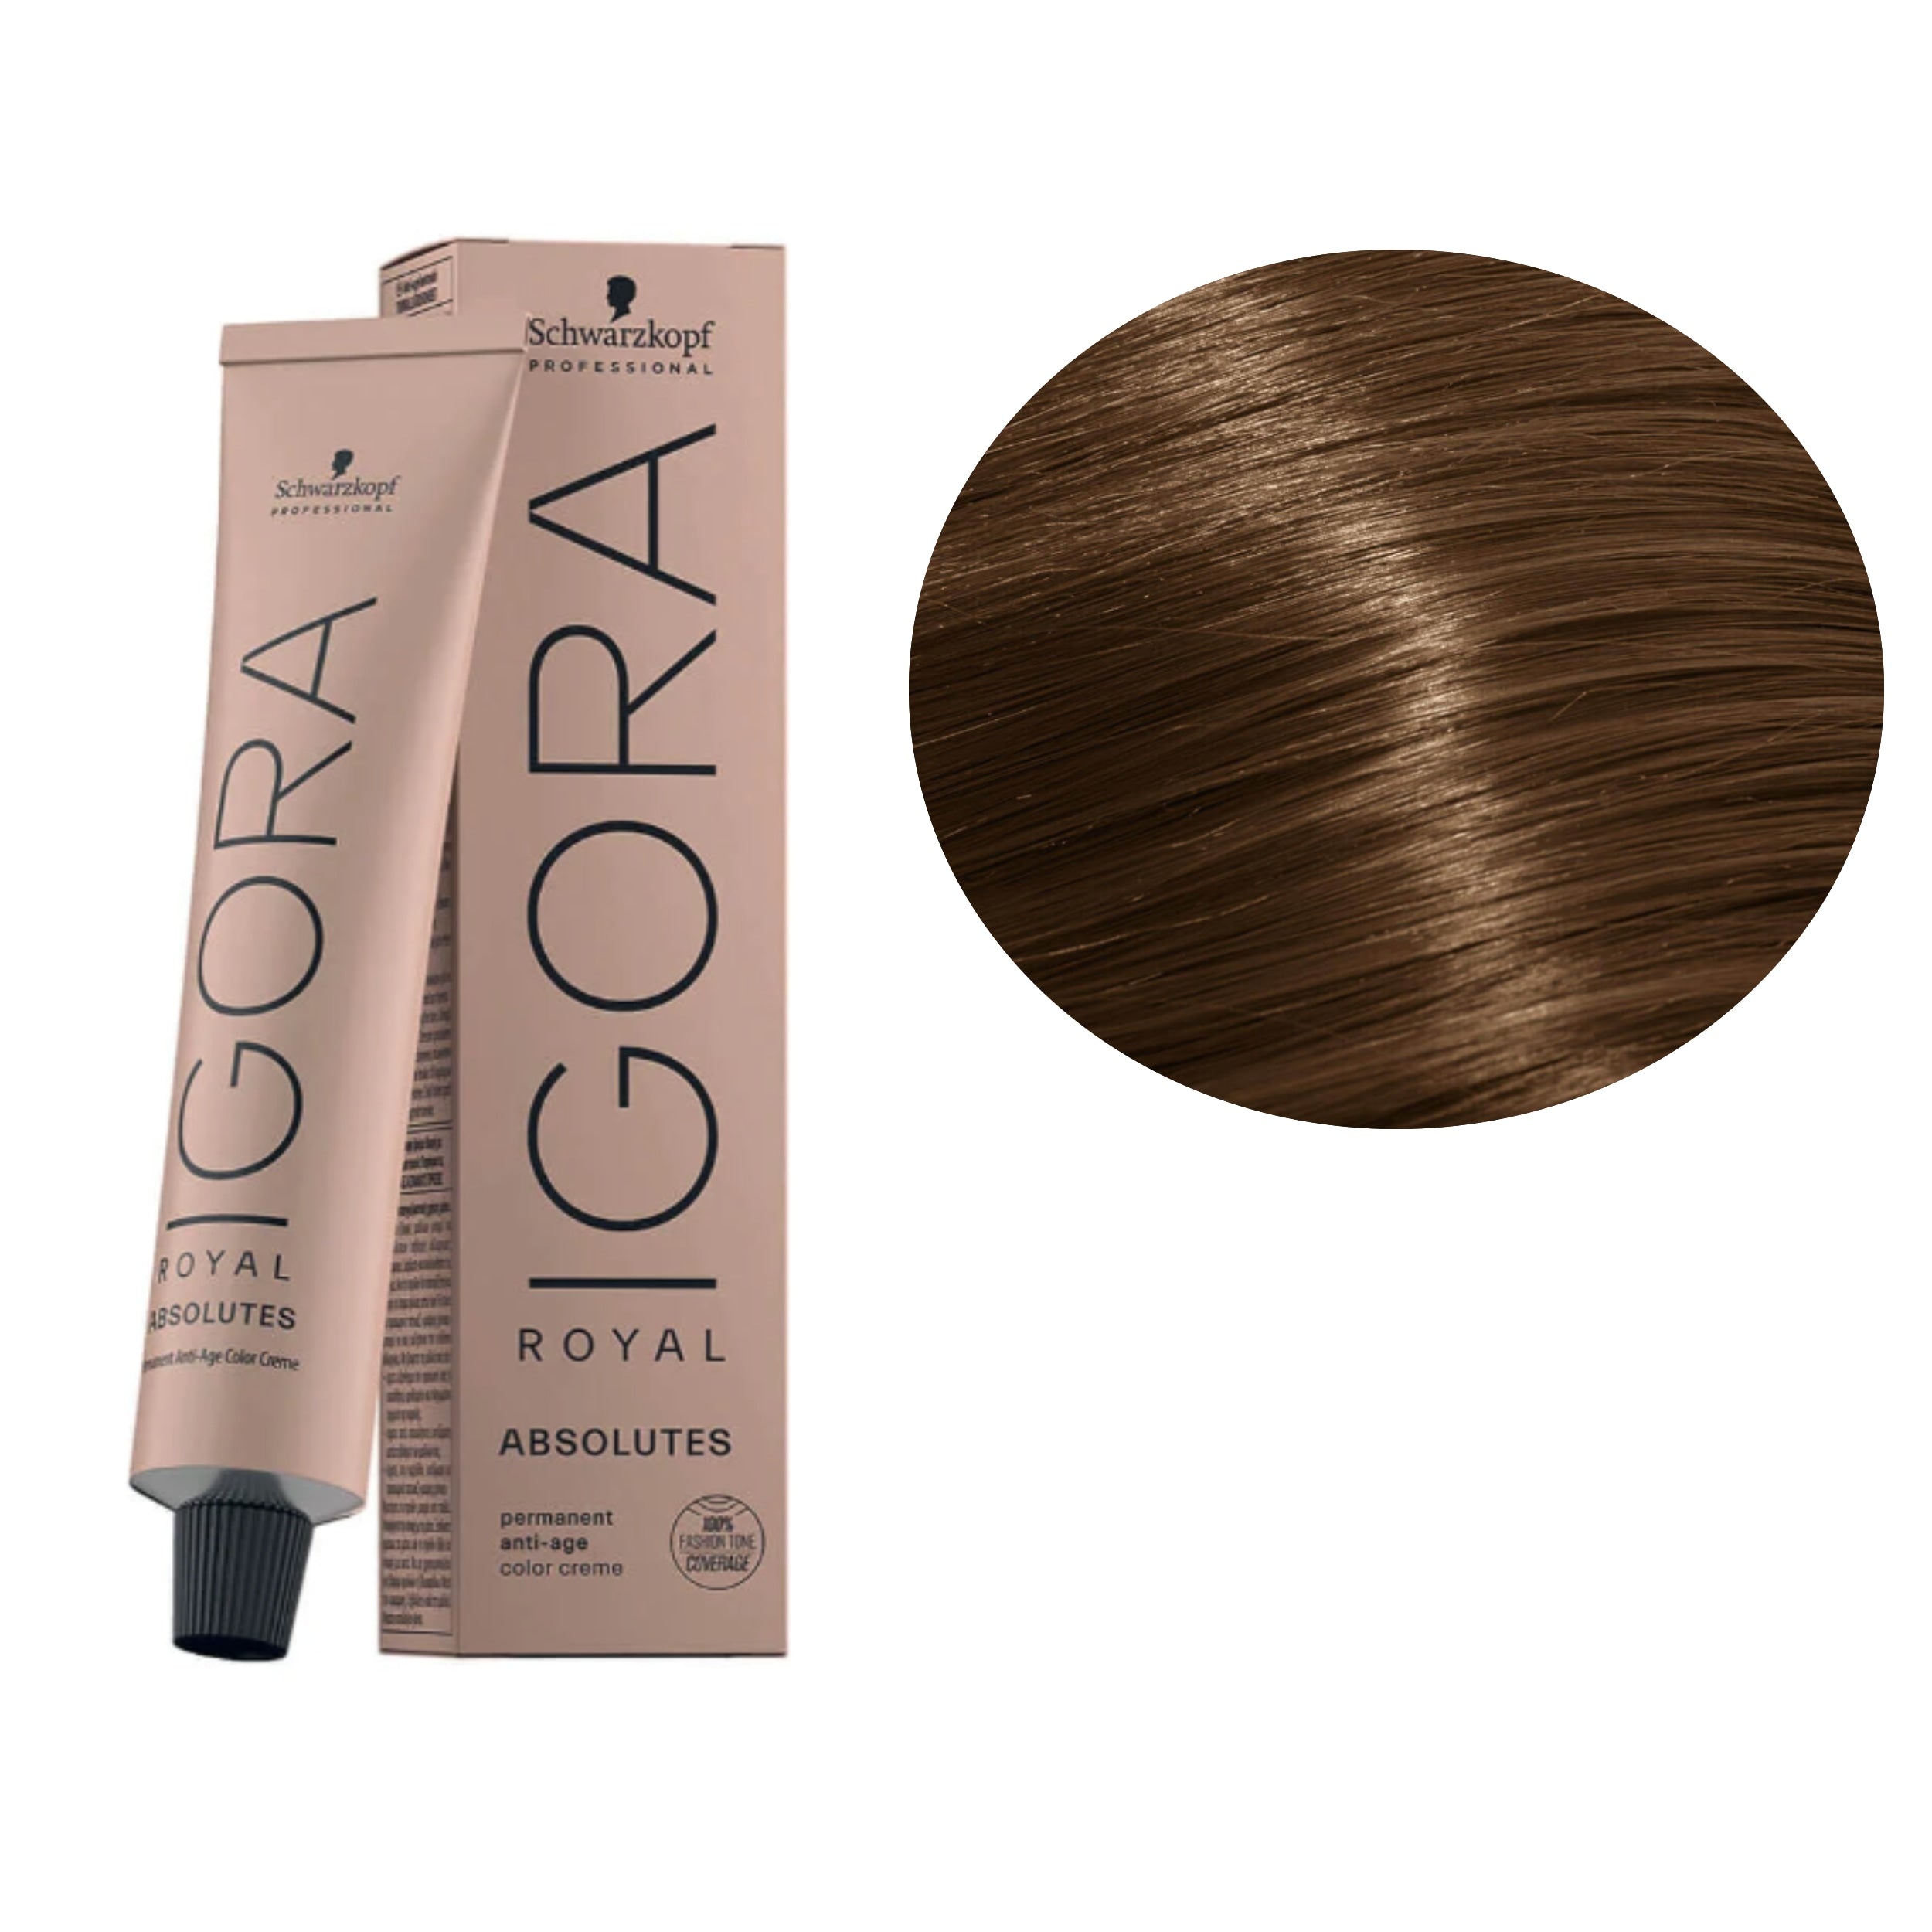 a brown hair color is shown next to the product